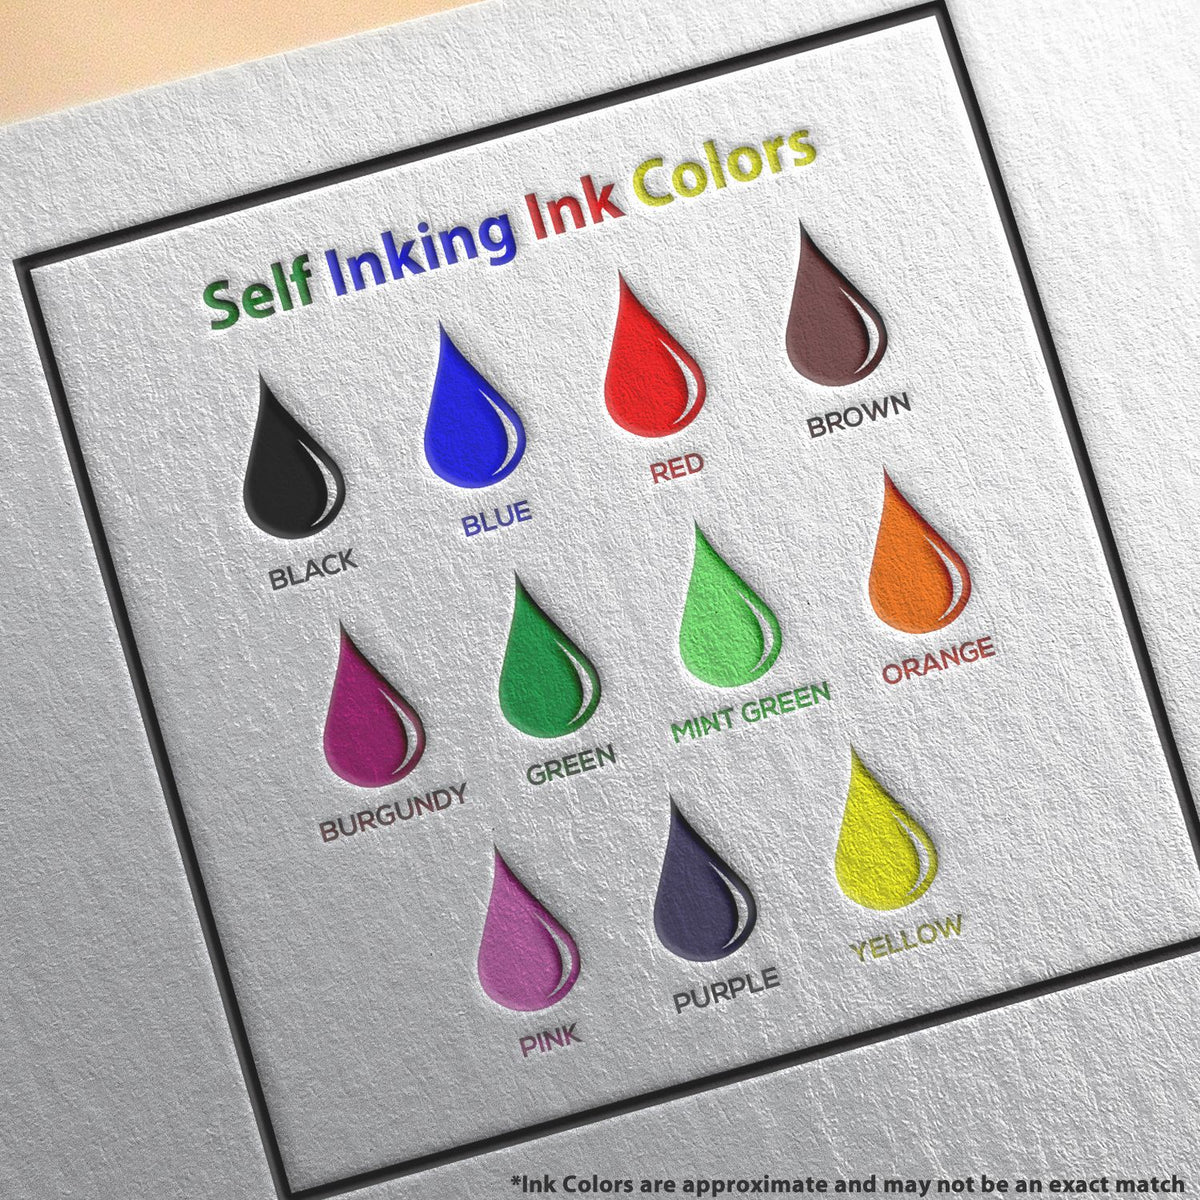 A picture showing the different ink colors or hues available for the Self-Inking Idaho PE Stamp product.